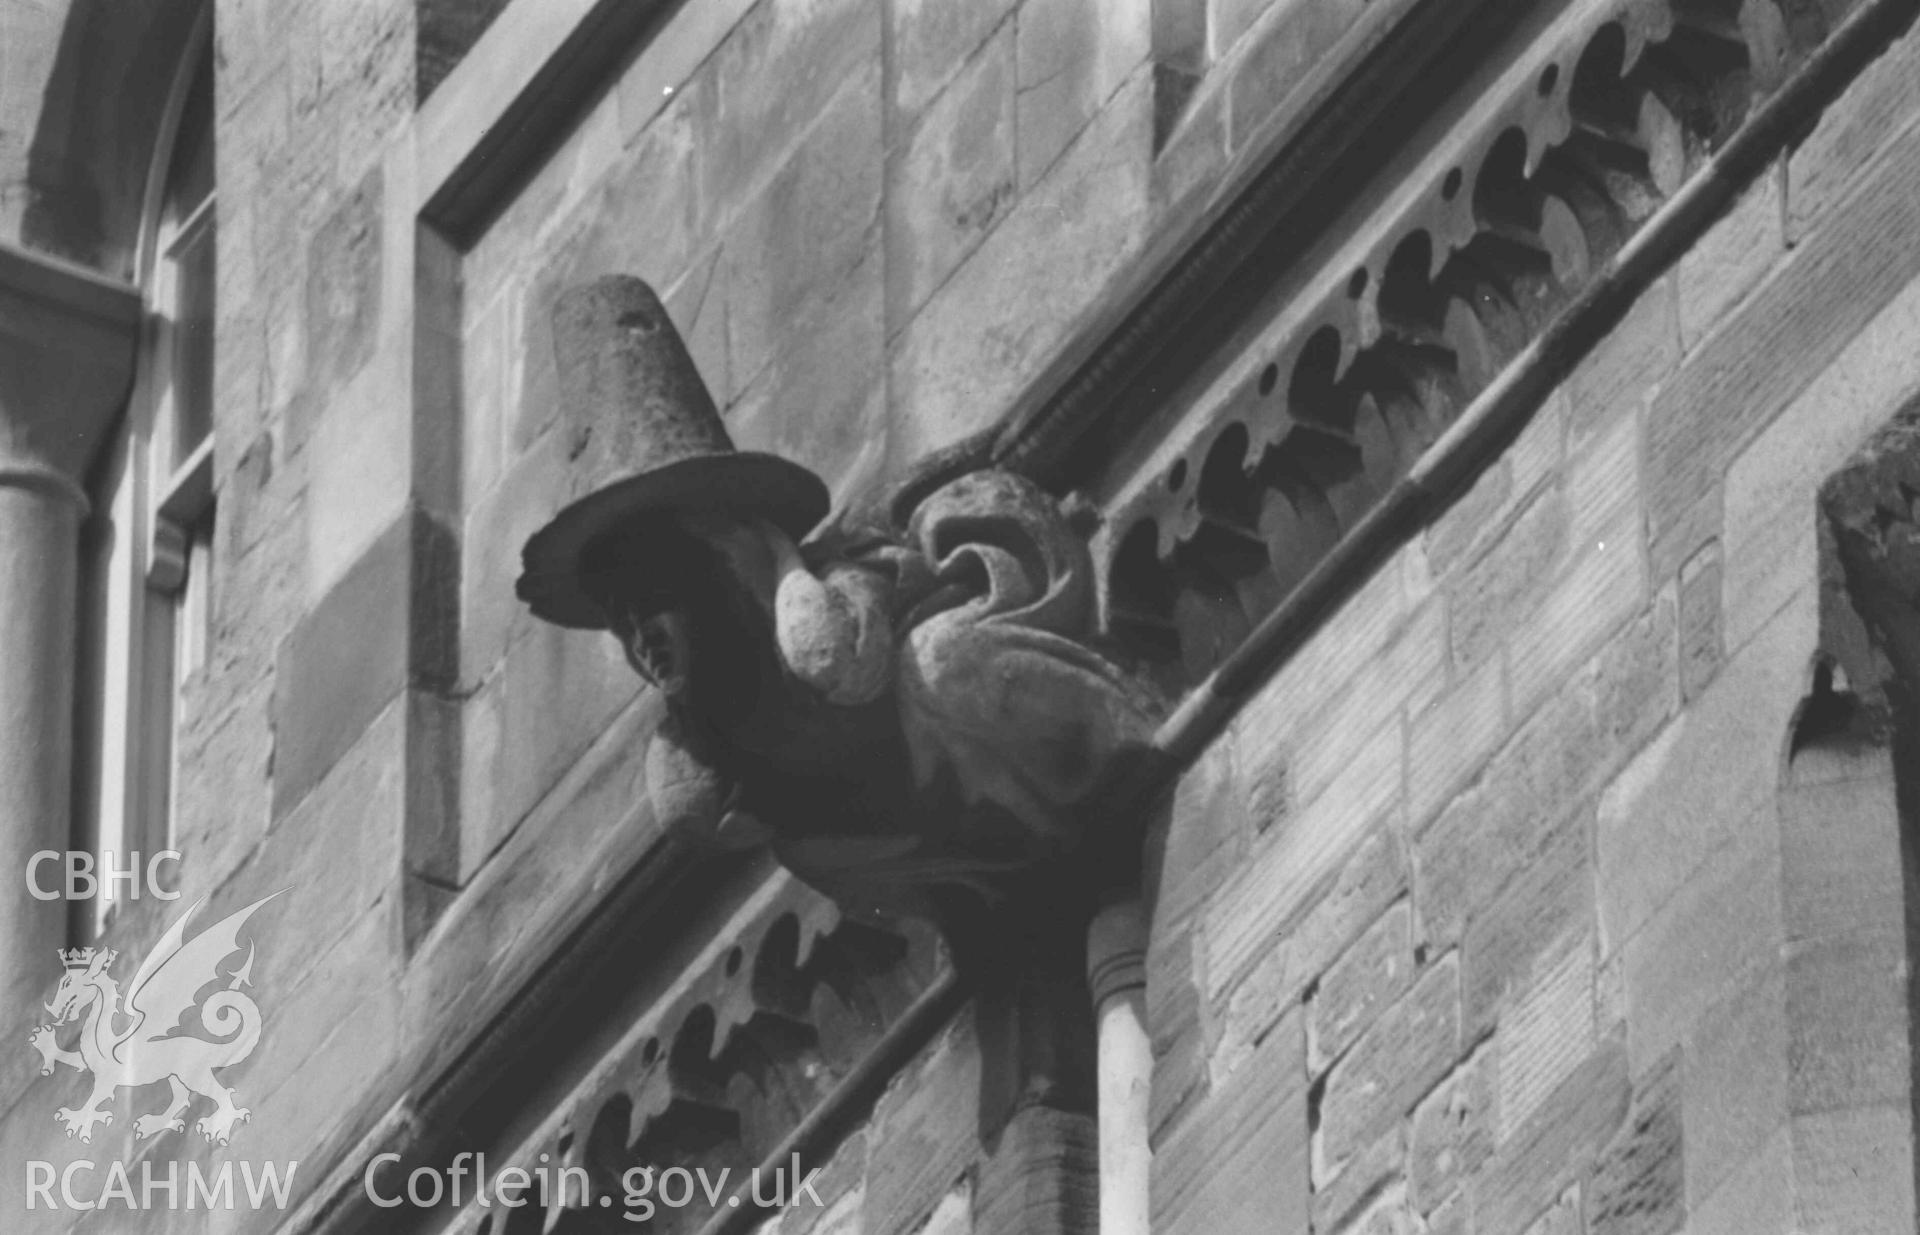 Digital copy of a black and white negative showing gargoyles on the south east side of the UCW building overlooking King Street, Aberystwyth (Telephoto). Photographed by Arthur Chater on 2 April  1969. Grid Reference SN 581 817.